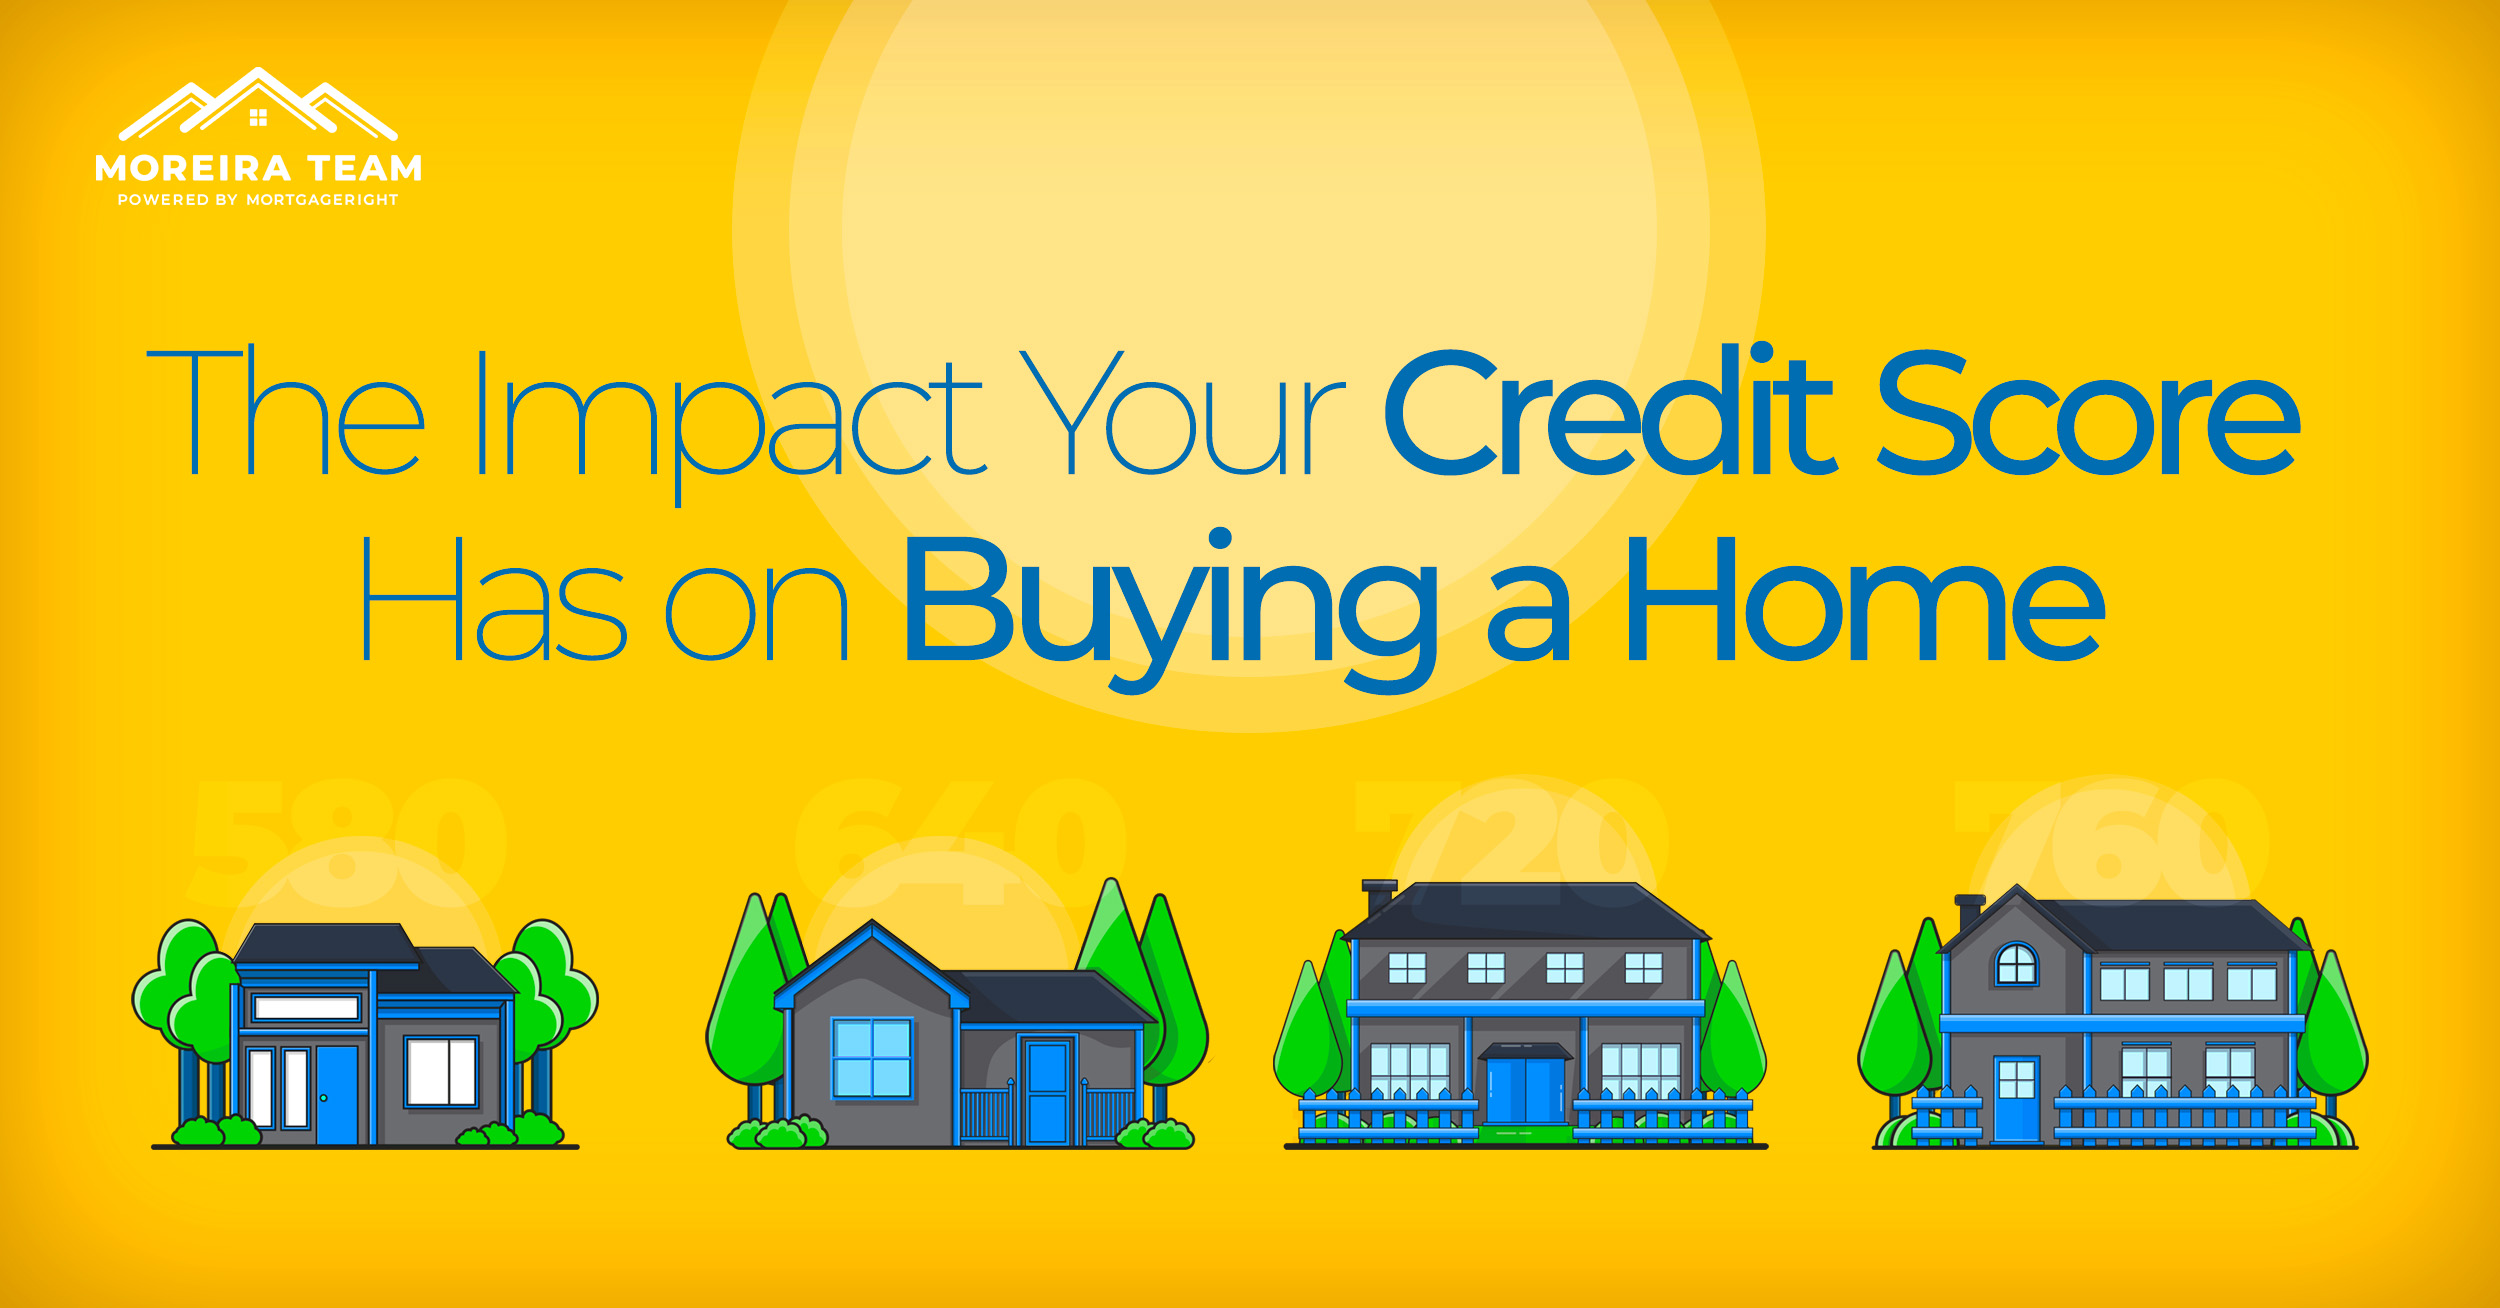 The Impact Your Credit Score Has on Buying a Home